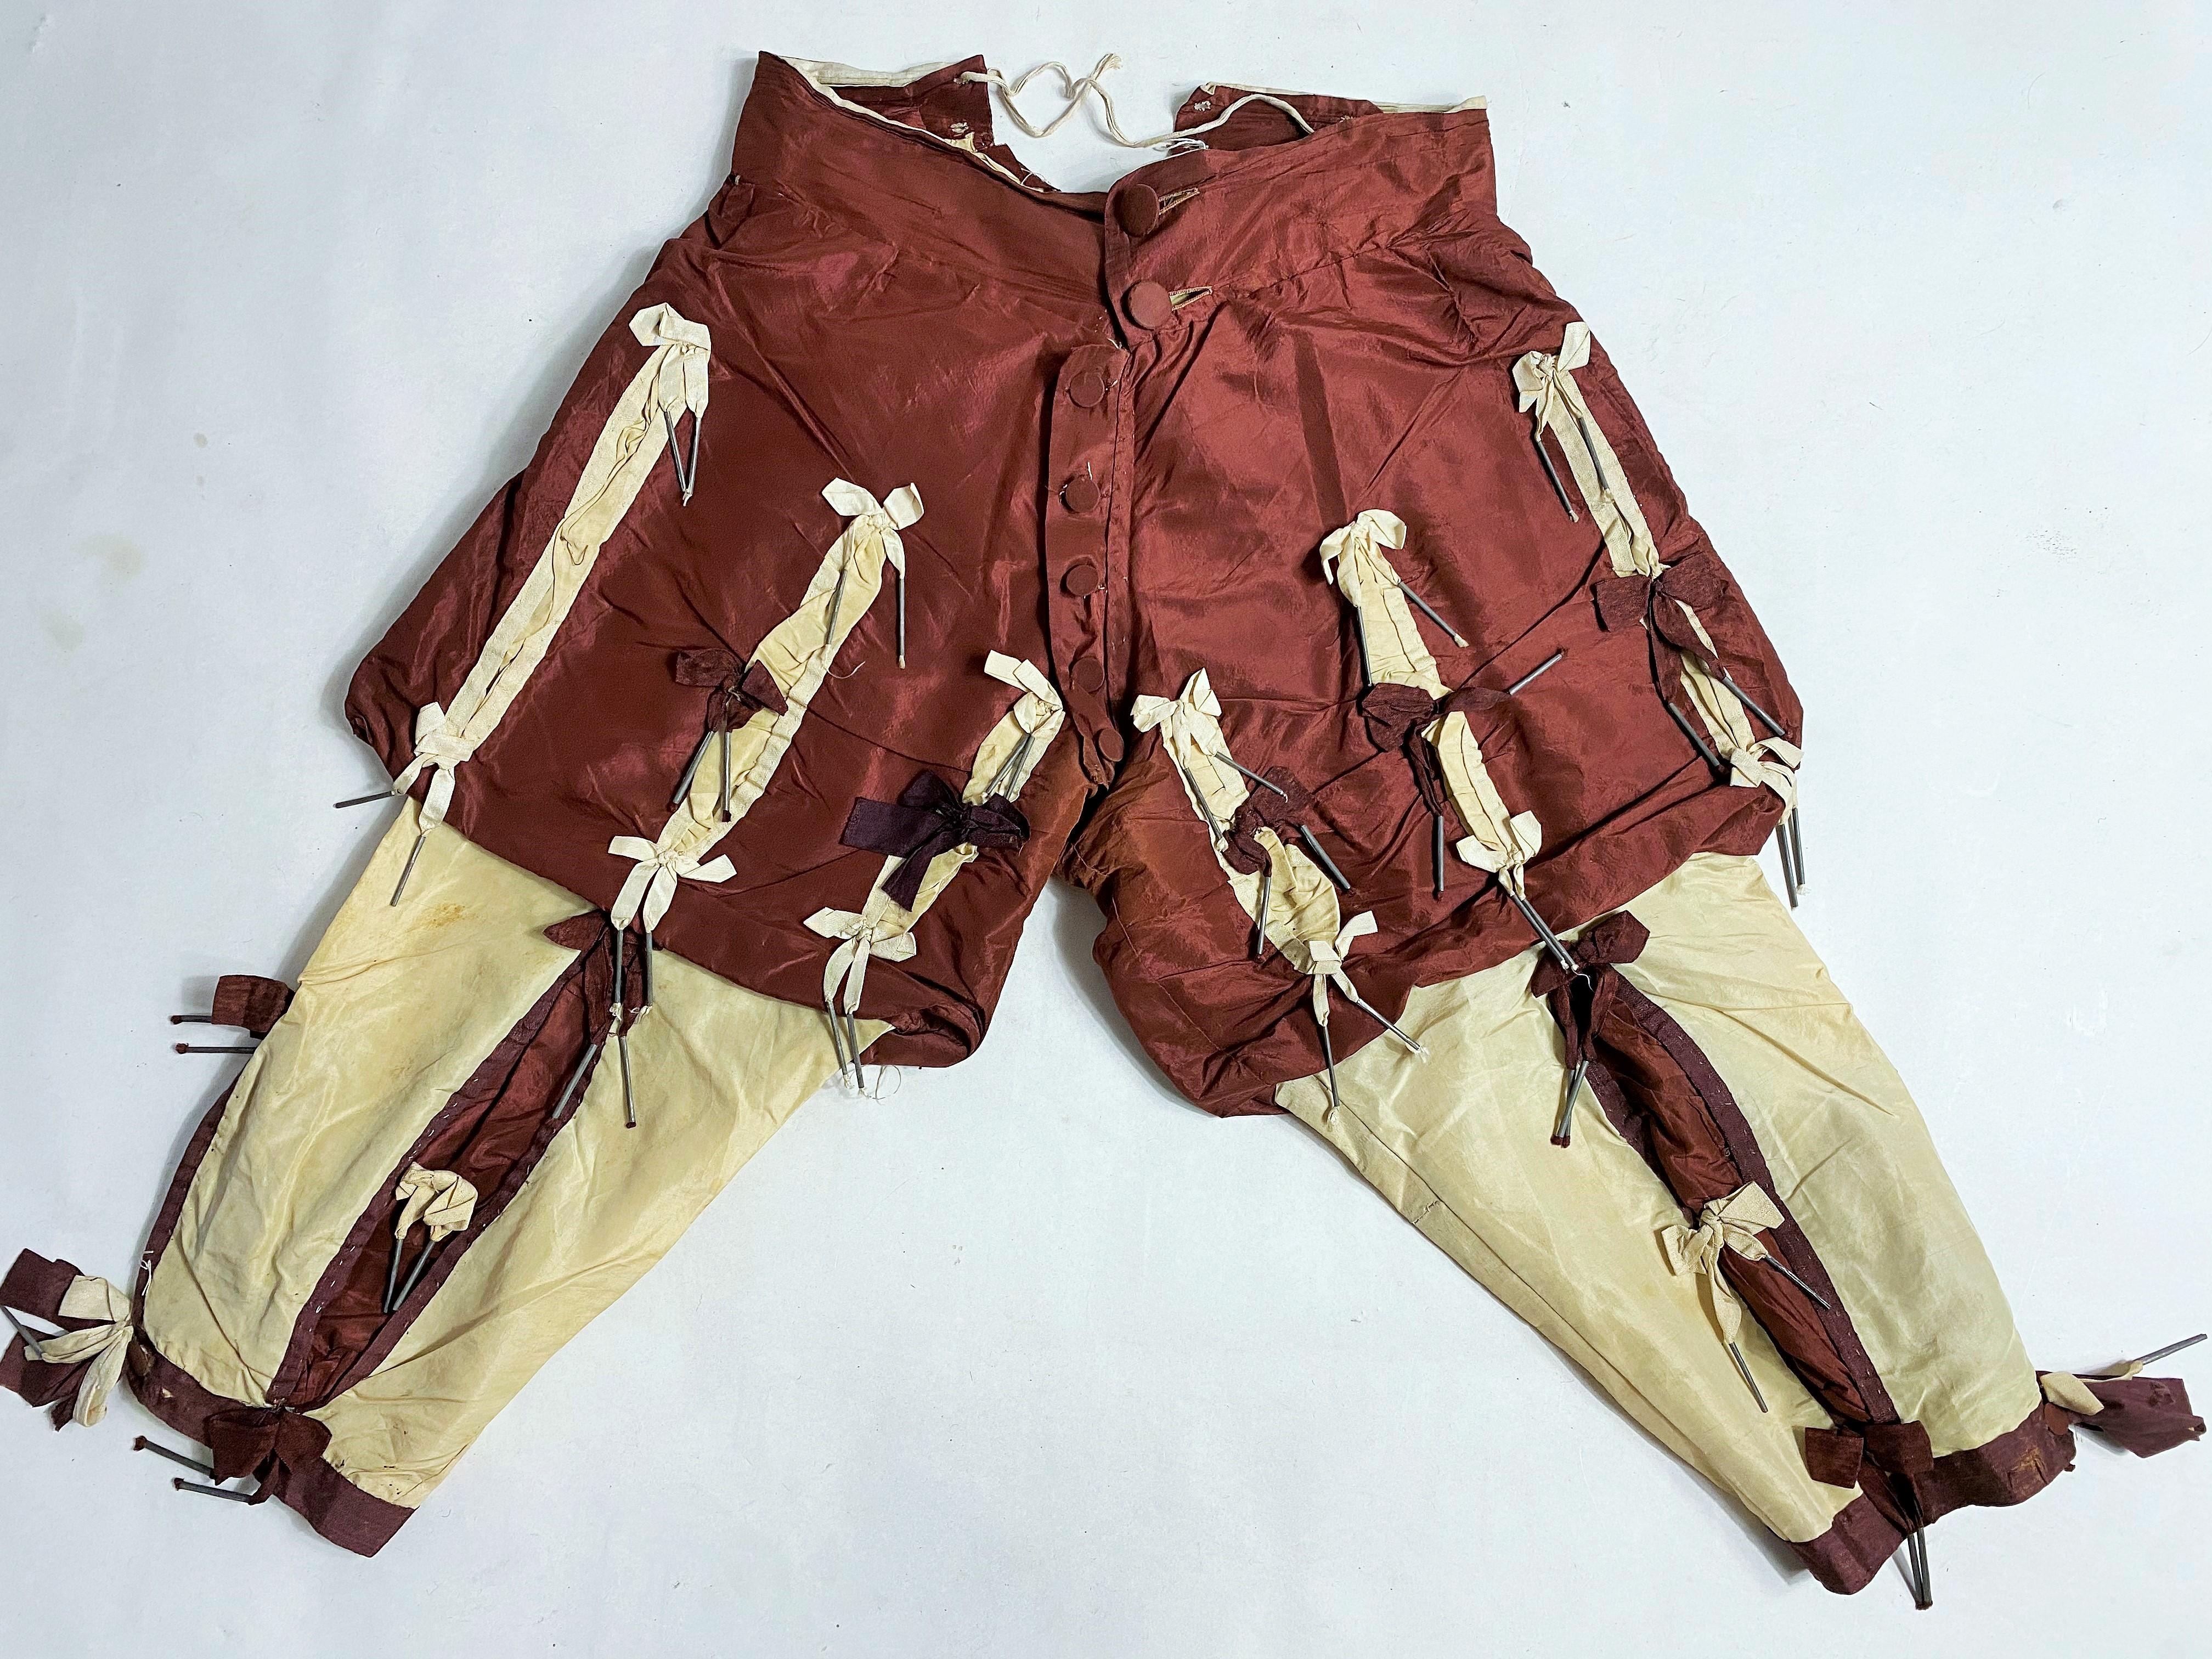 Circa 1780
England

Exceptional British sportswear, probably Jockey, in cream and aubergine silk taffeta dating from the last quarter of the 18th century. Slim-fitting athletic blouse, high buttoned collar in front, aubergine ribbon appliqué